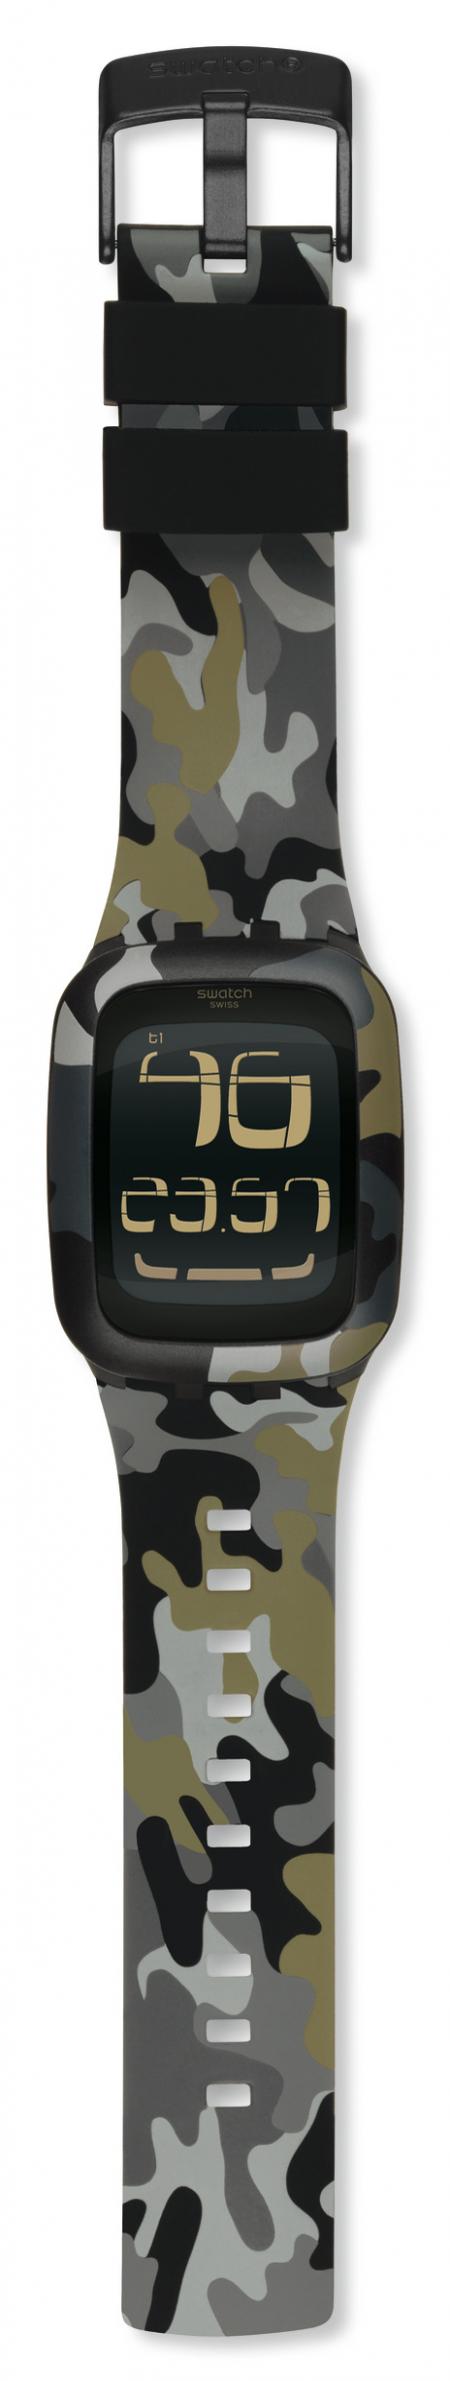 Swatch Touch Camouflage